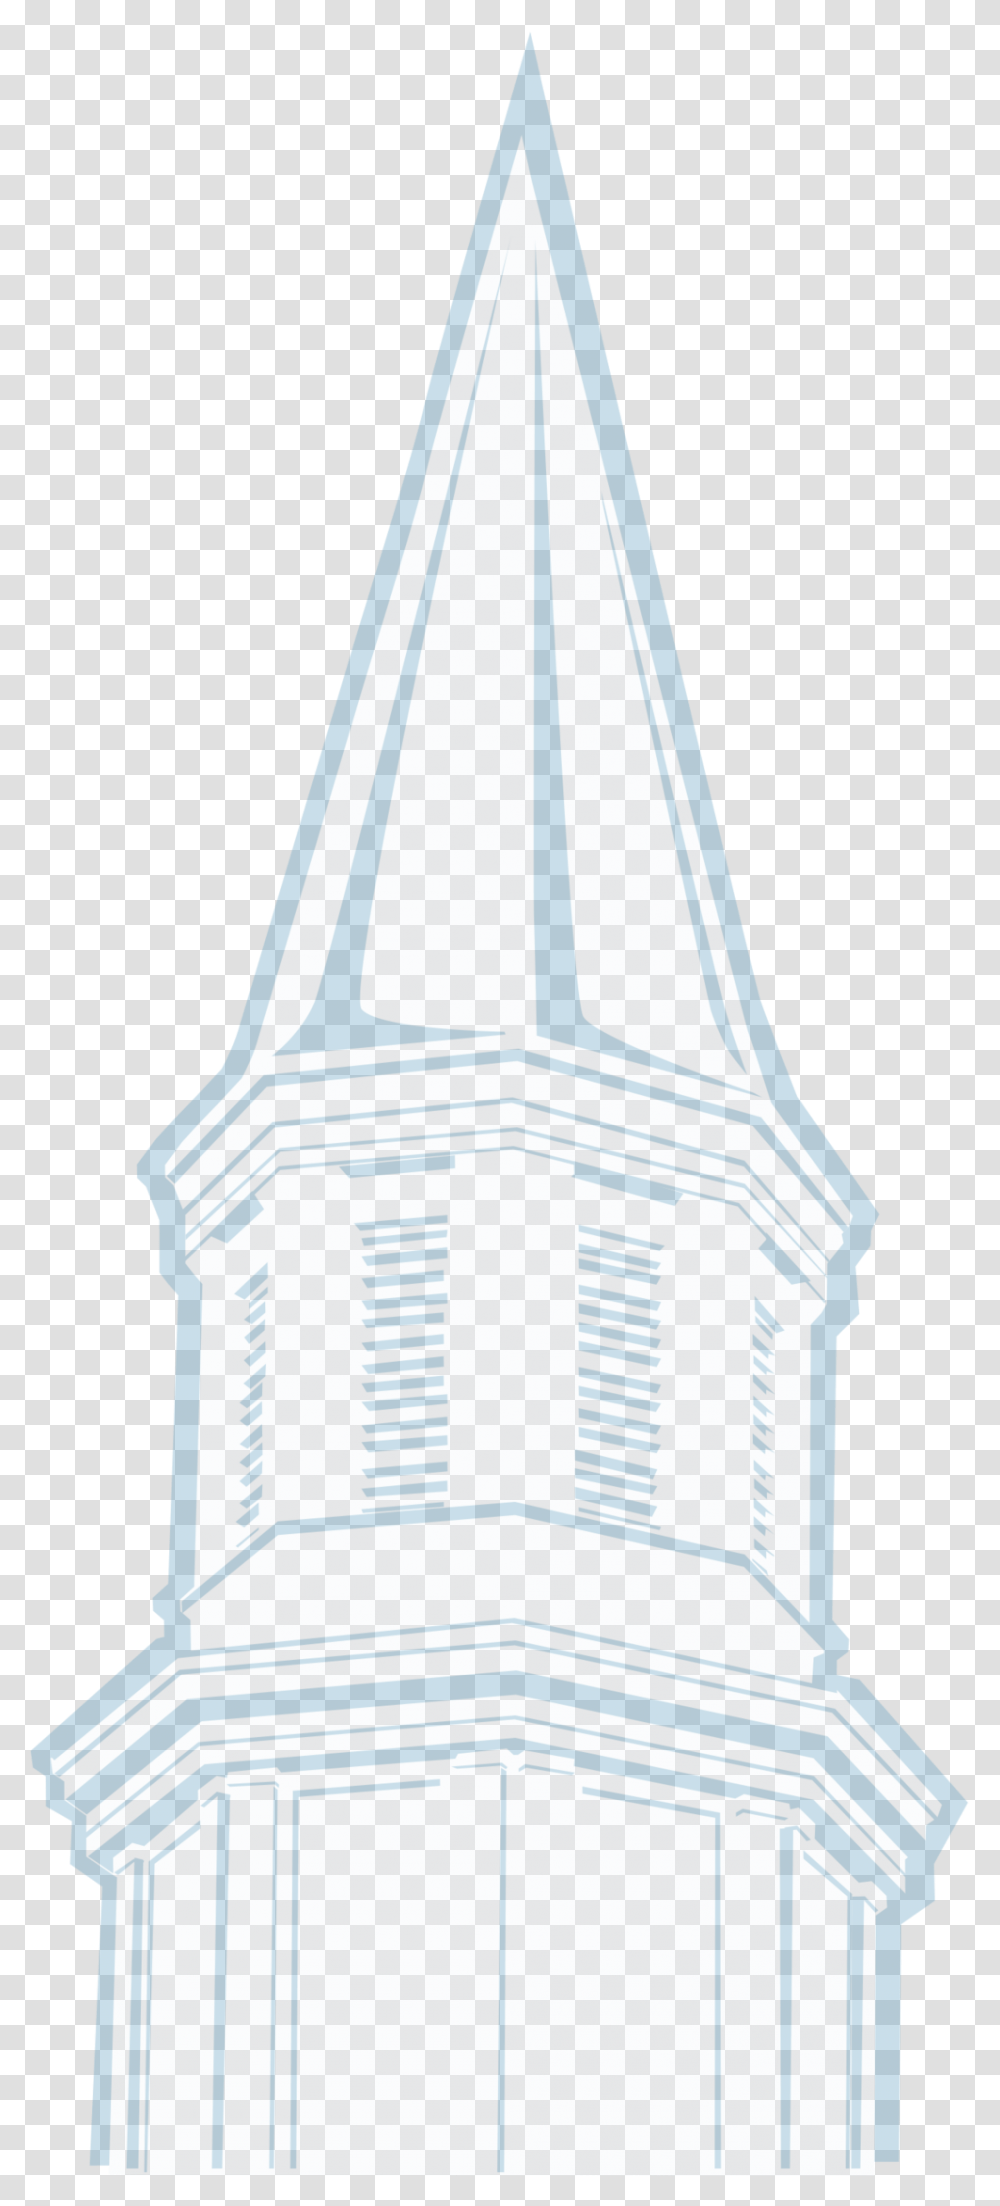 Roswellpress Full Steeple, Tower, Architecture, Building, Spire Transparent Png